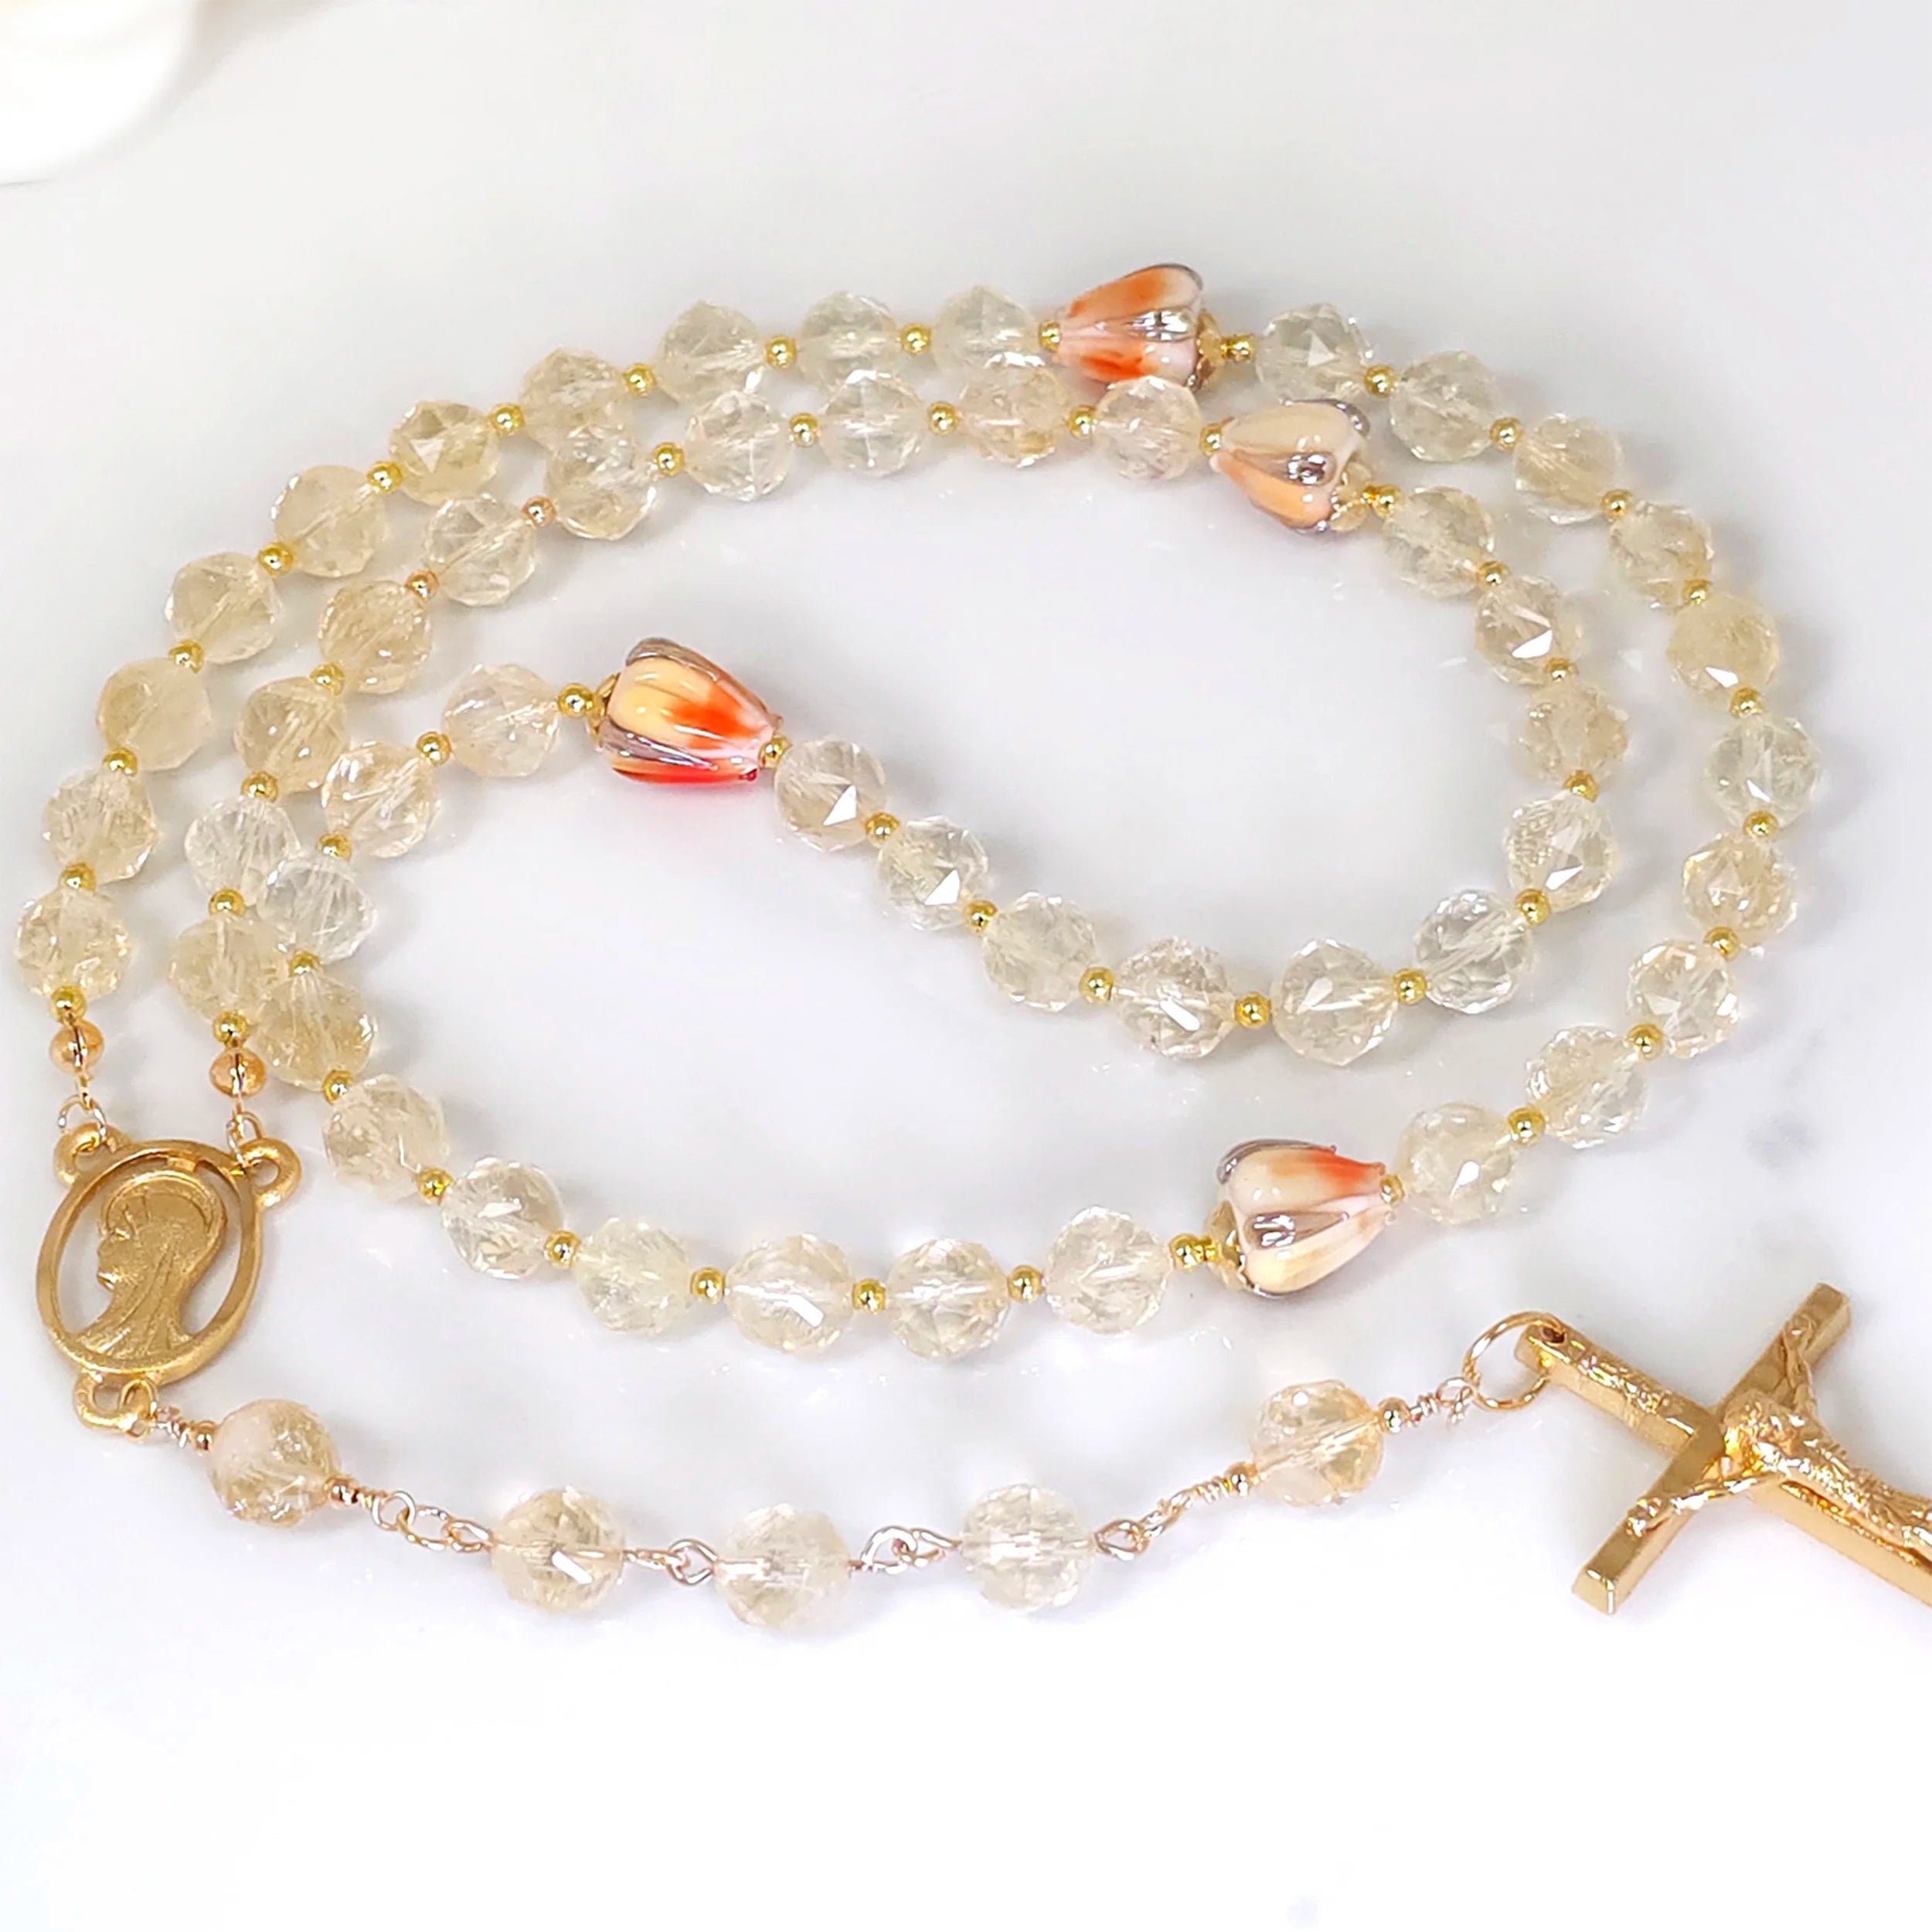 Rosary with gold citrine beads and orange floral lamp work accents with silver leaf, laid out on a table.